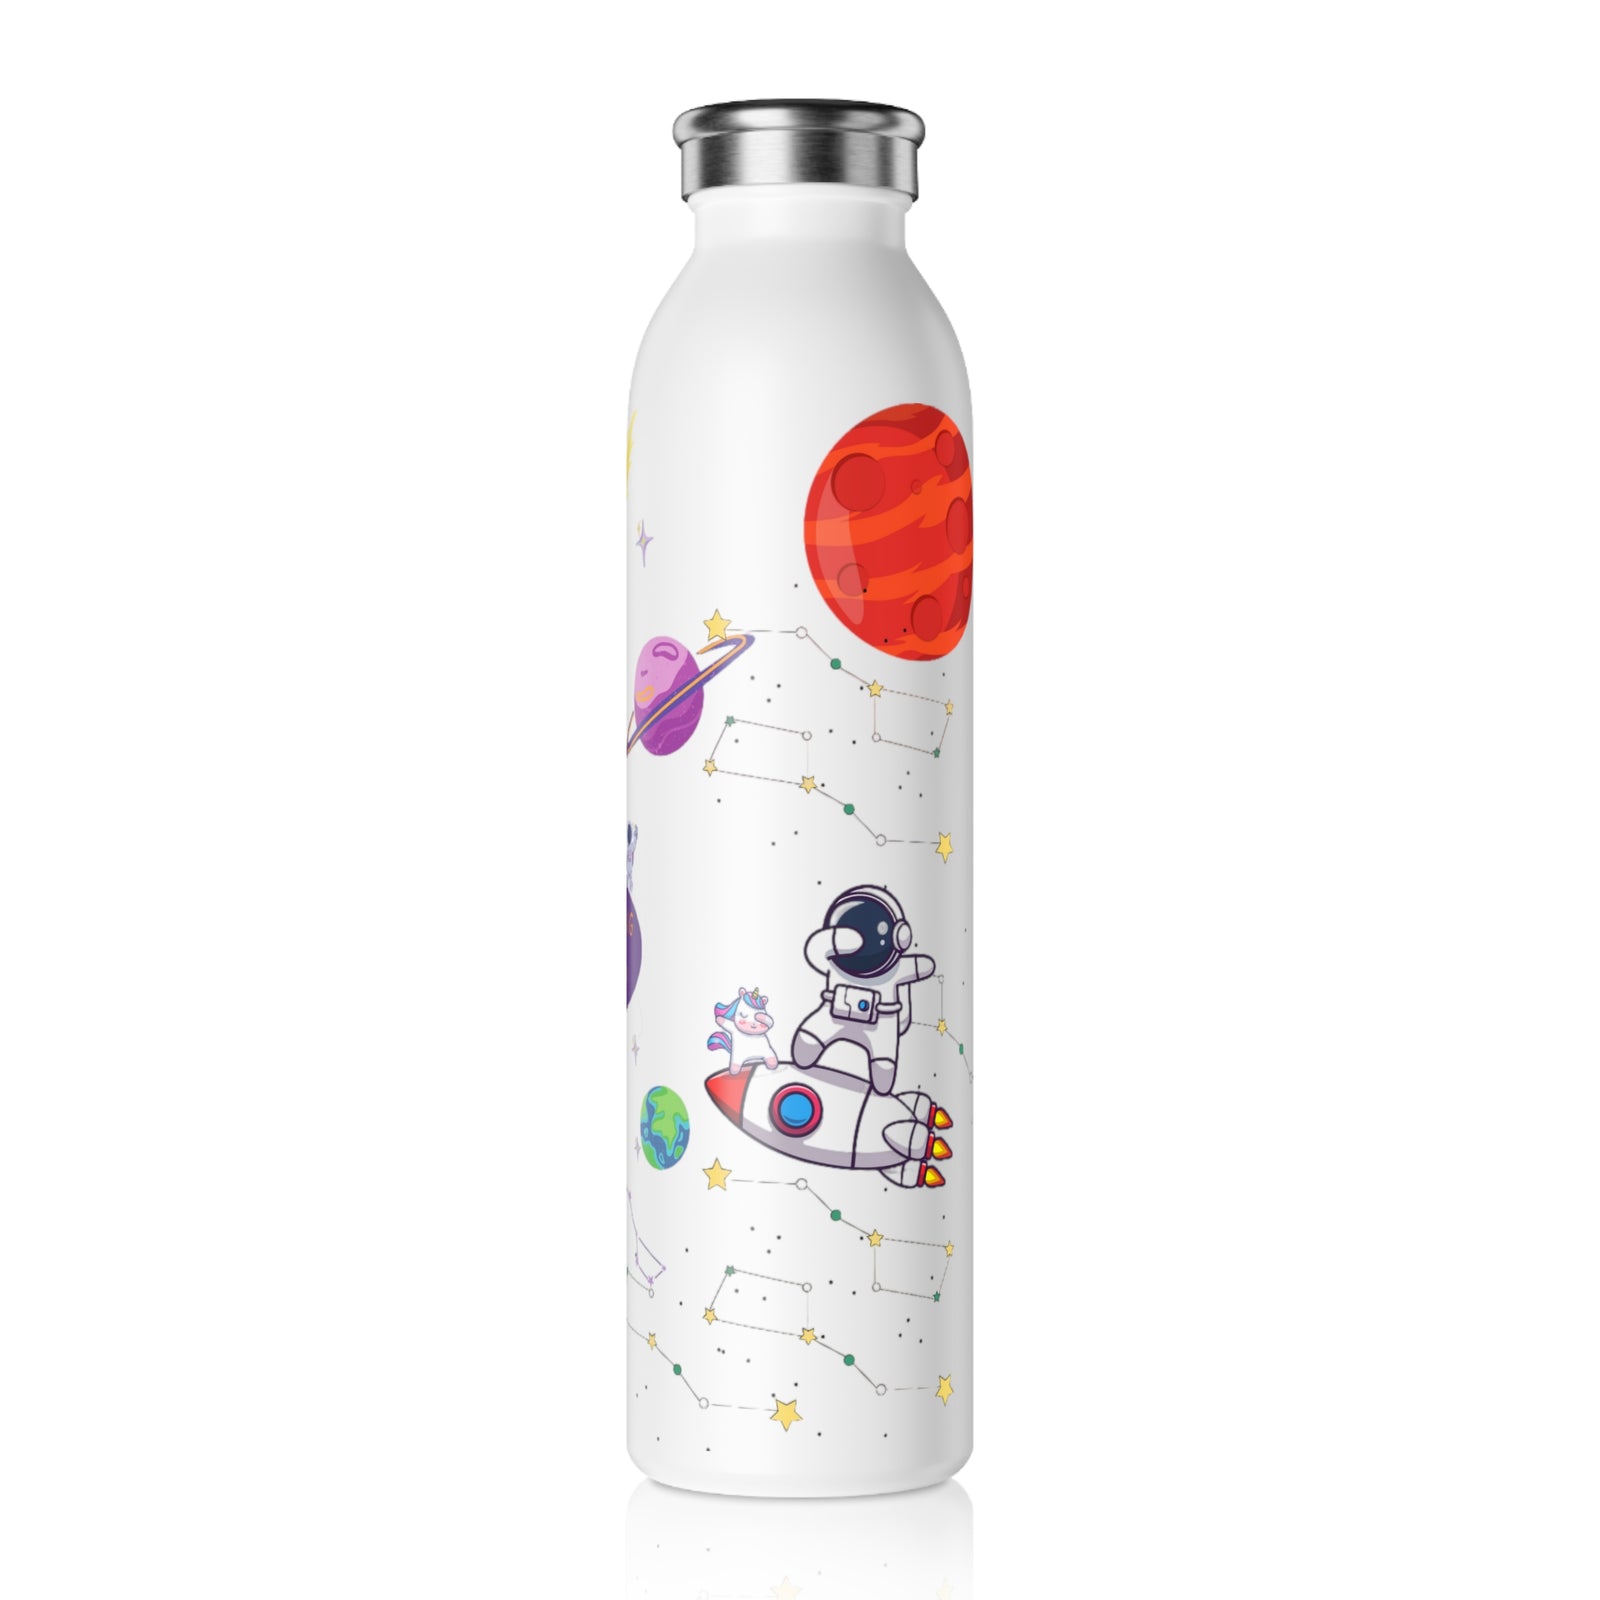 Explore the Cosmos Stainless Steel Water Bottle - Stars, Planets, Galaxies, Astronauts, and Rocket Ship Fun for Kids and Parents - TryKid's Cool and Trending New Design